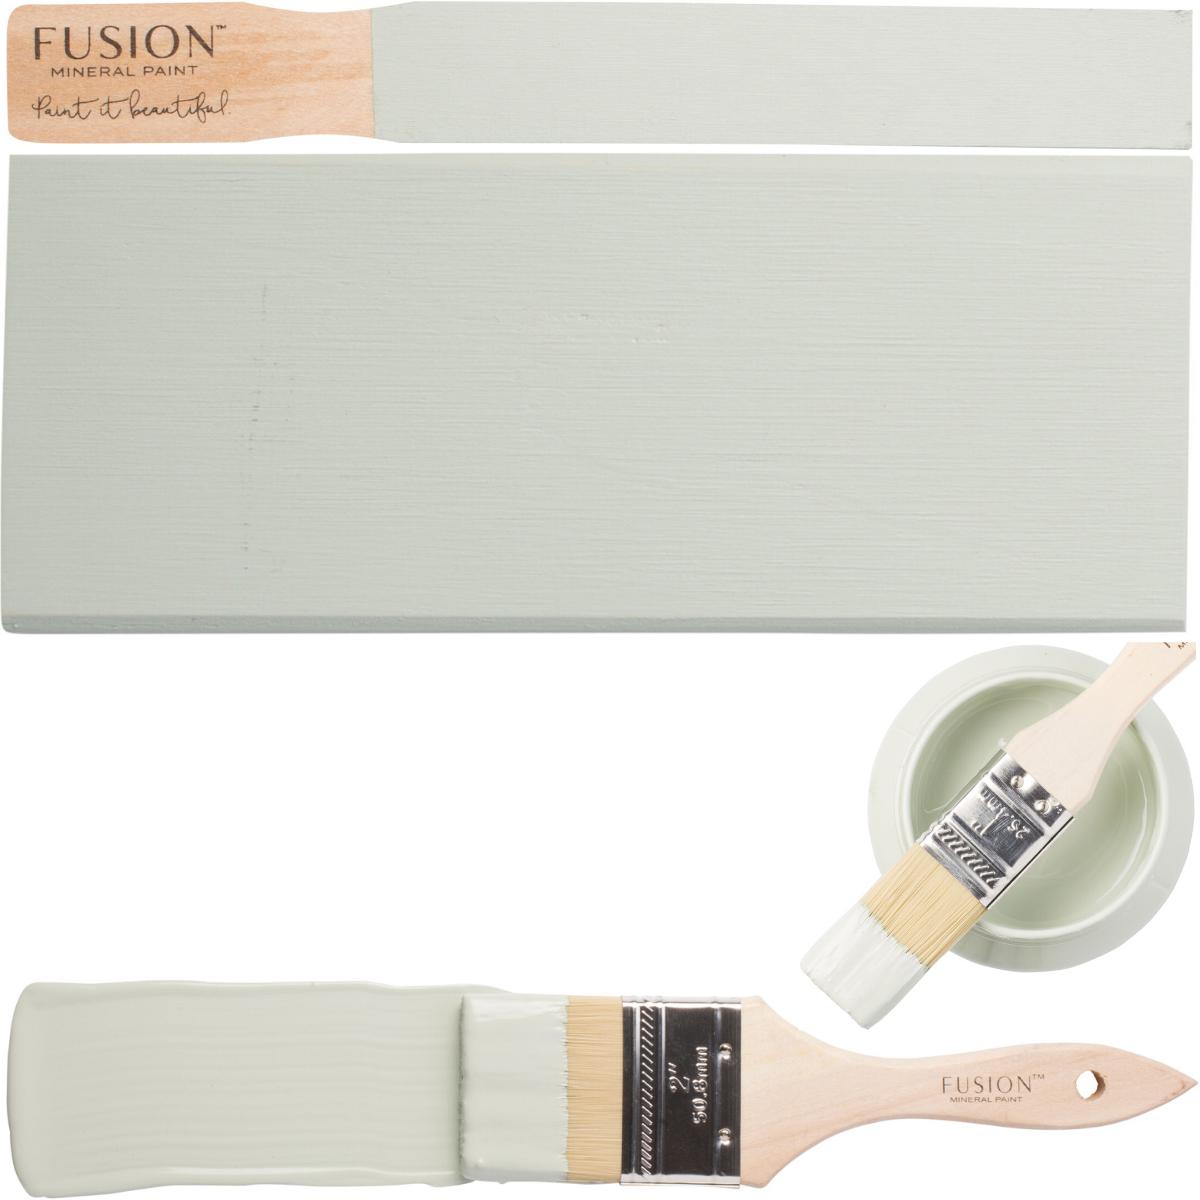 Inglenook Fusion Mineral Paint @ The Painted Heirloom